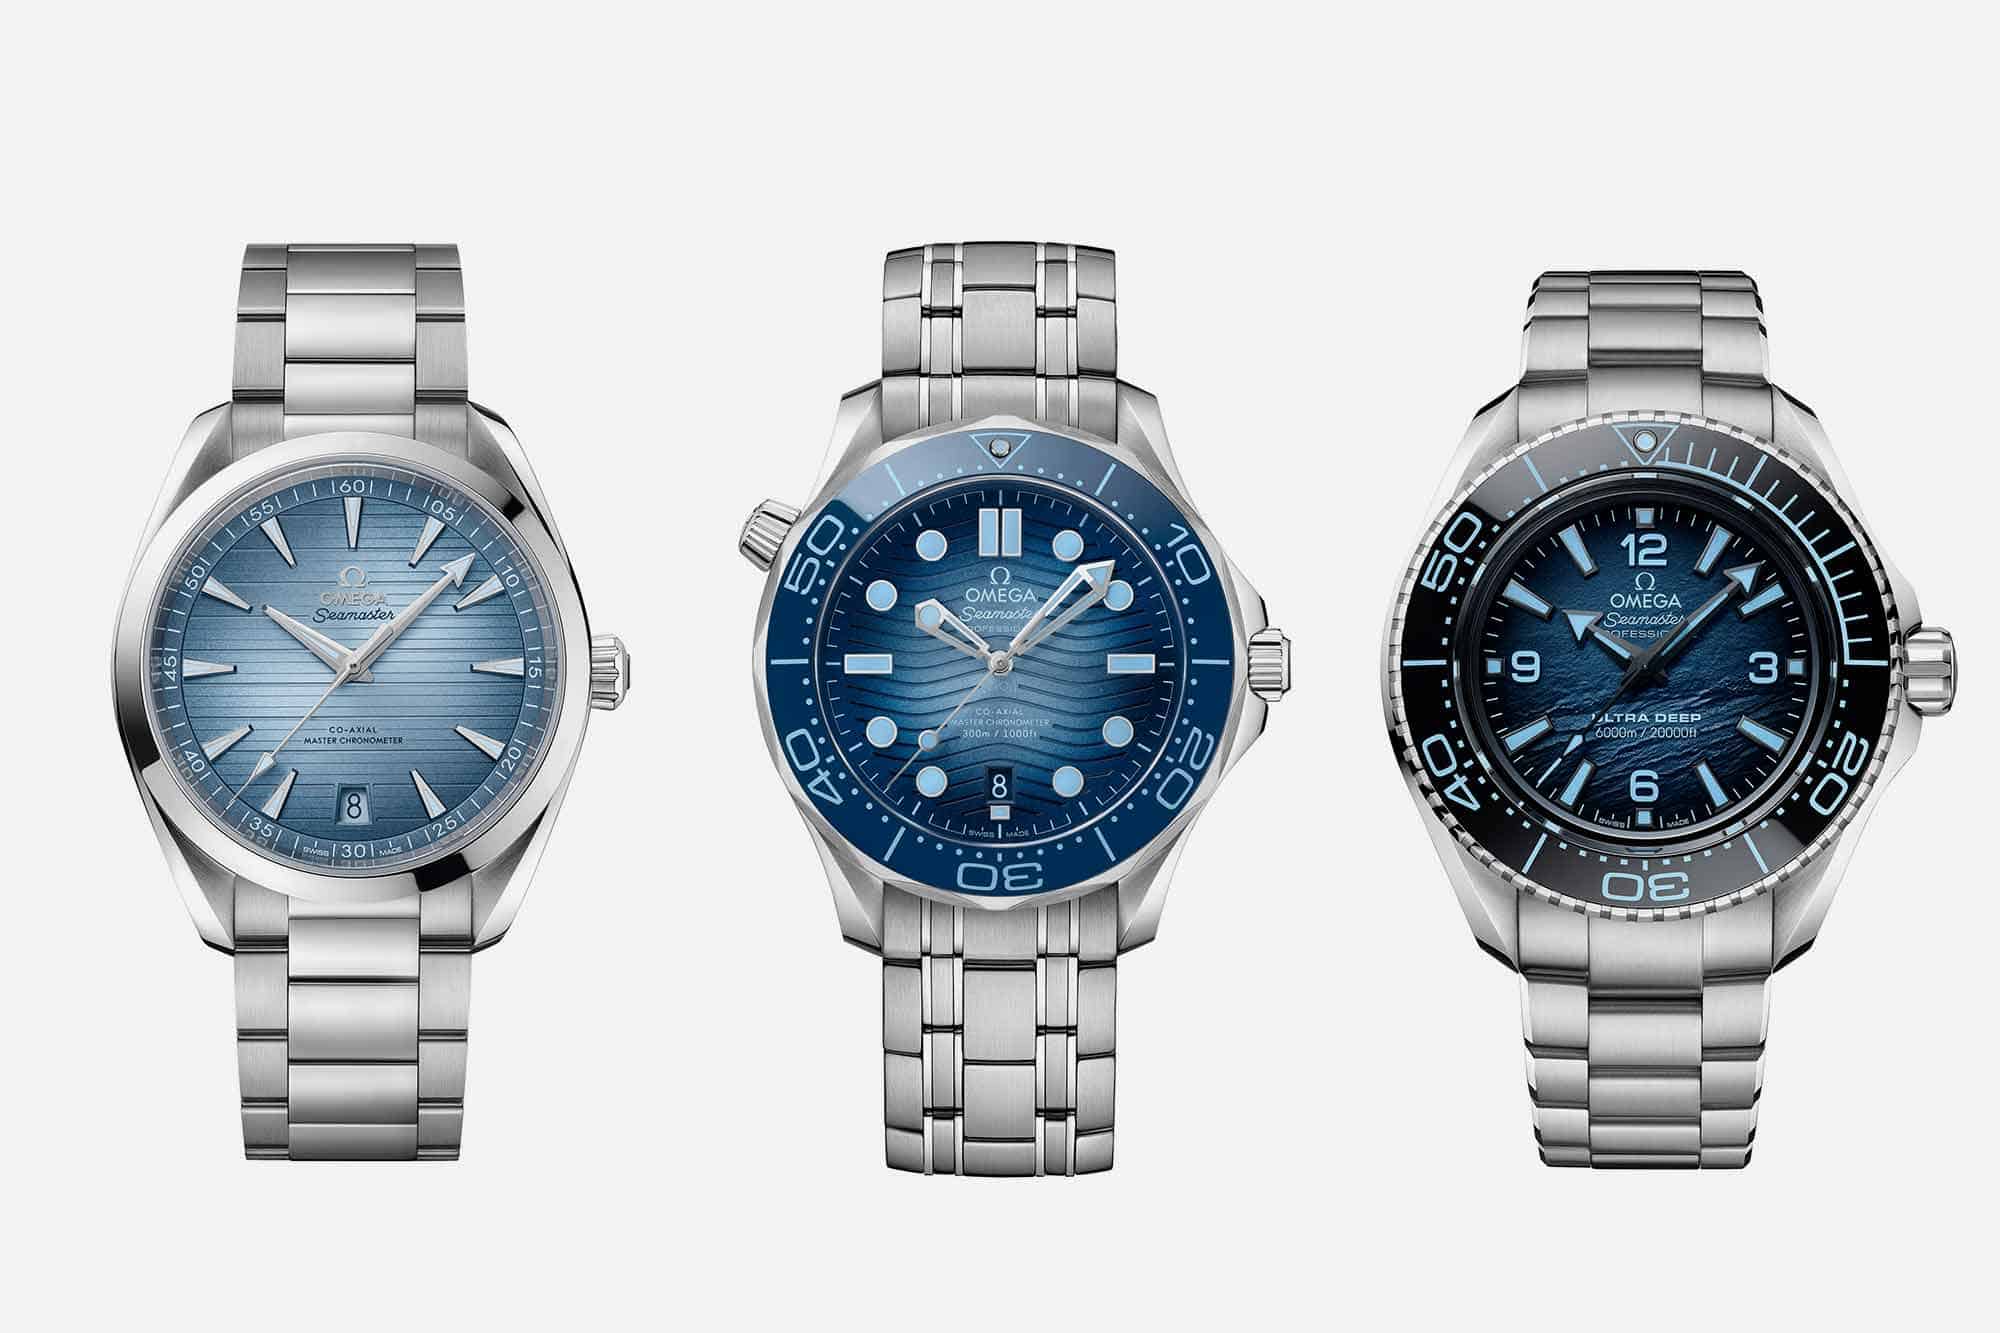 Omega Celebrates 75 Years of the Seamaster with the New “Summer Blue” Collection